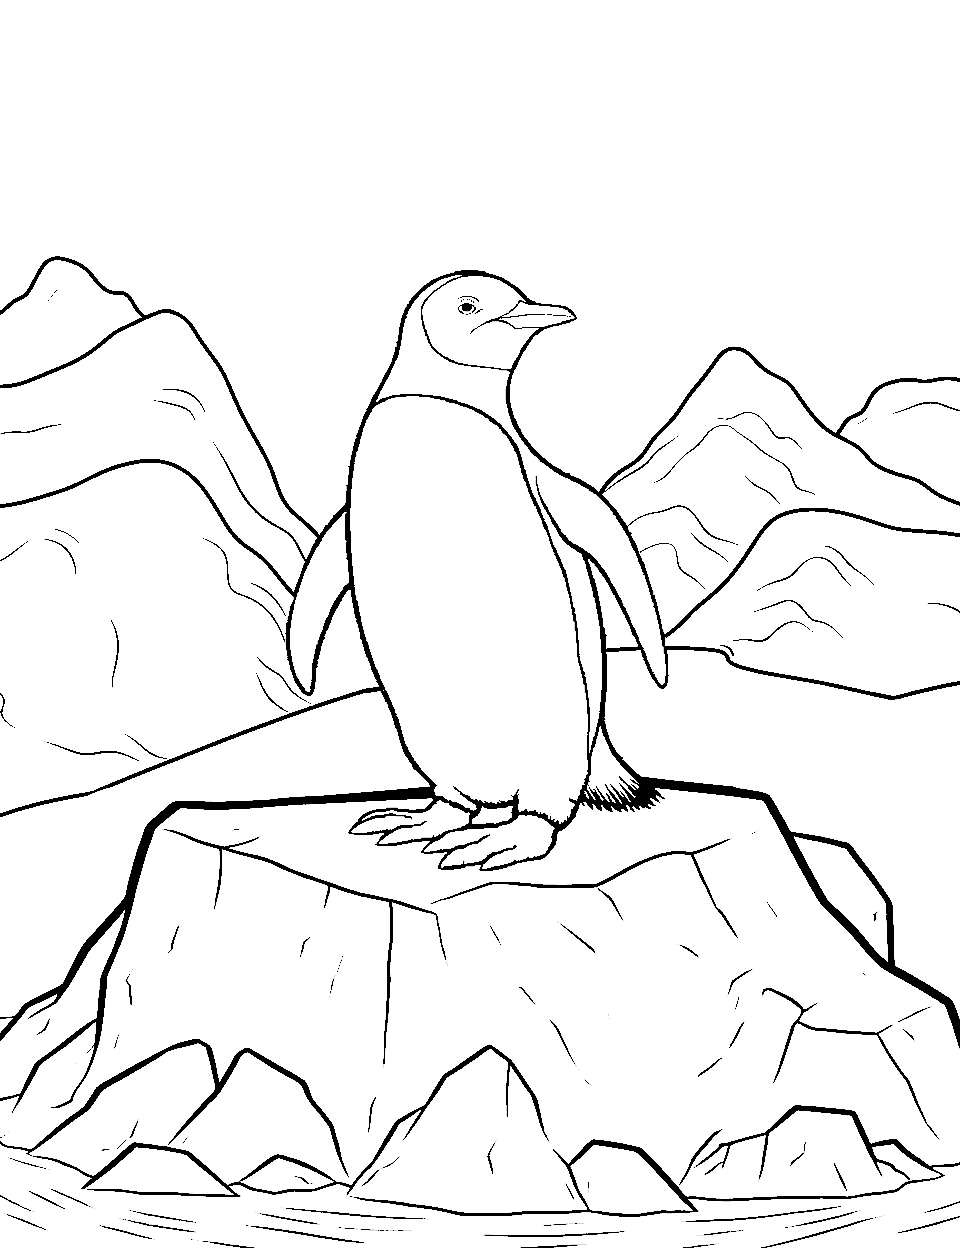 Iceberg Lookout Coloring Page - A penguin perched atop a small iceberg, scanning the horizon.